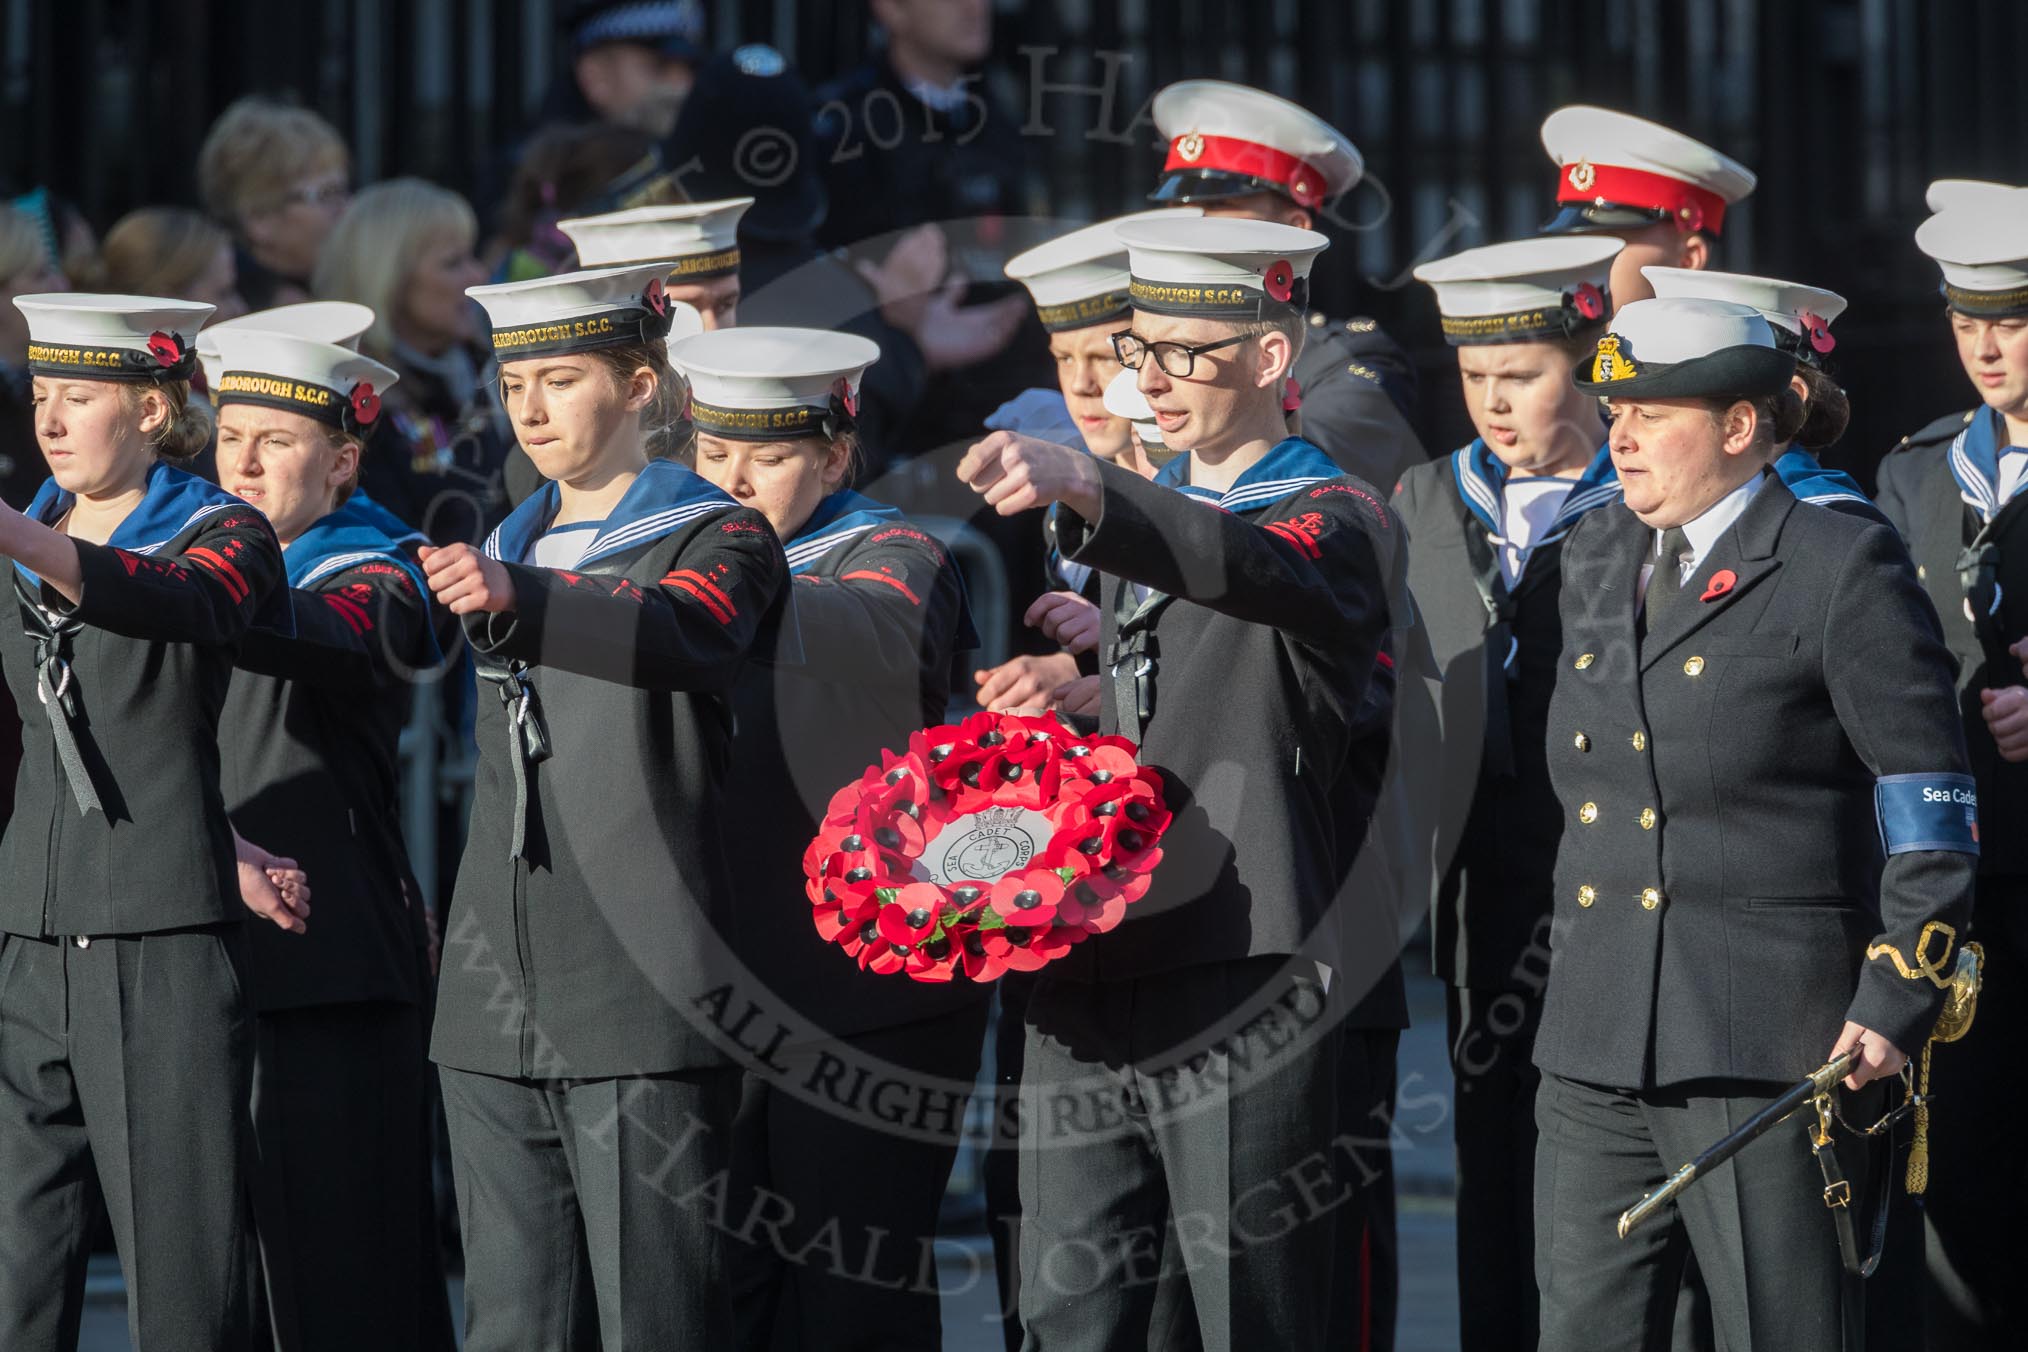 March Past, Remembrance Sunday at the Cenotaph 2016: M32 Army and combined Cadet Force.
Cenotaph, Whitehall, London SW1,
London,
Greater London,
United Kingdom,
on 13 November 2016 at 13:17, image #2789